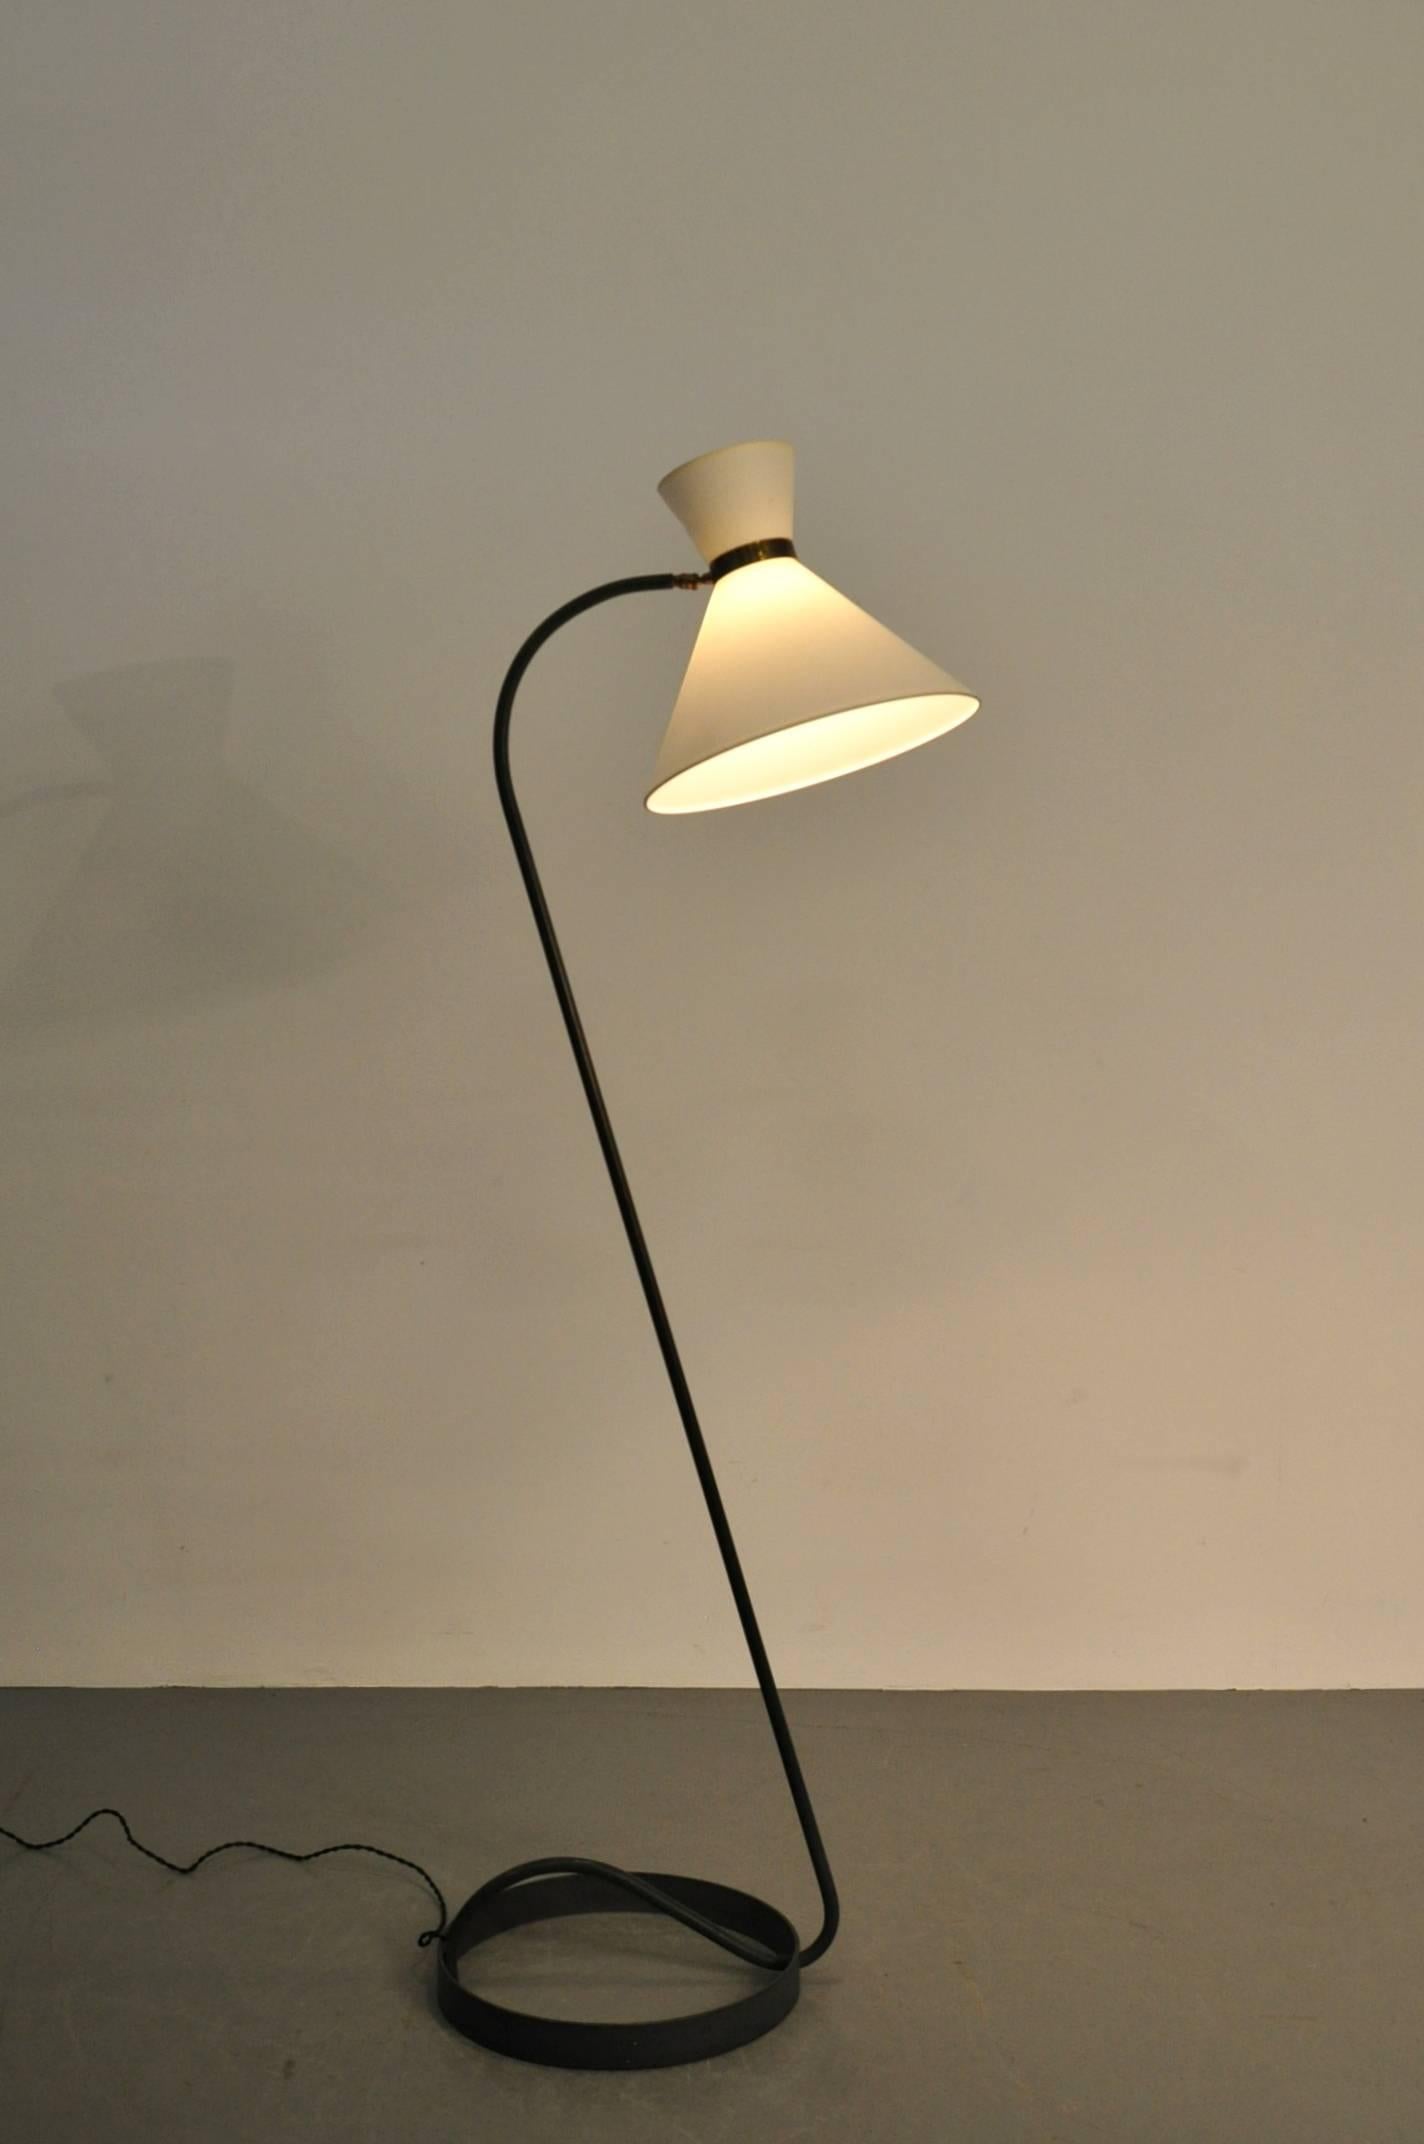 Luxurious floor lamp made by Maison Lunel in France, circa 1950.

It has a high quality metal base and slightly curved arm. The white fabric hood is connected by a beautifully crafted brass piece of armature, all together giving making this piece